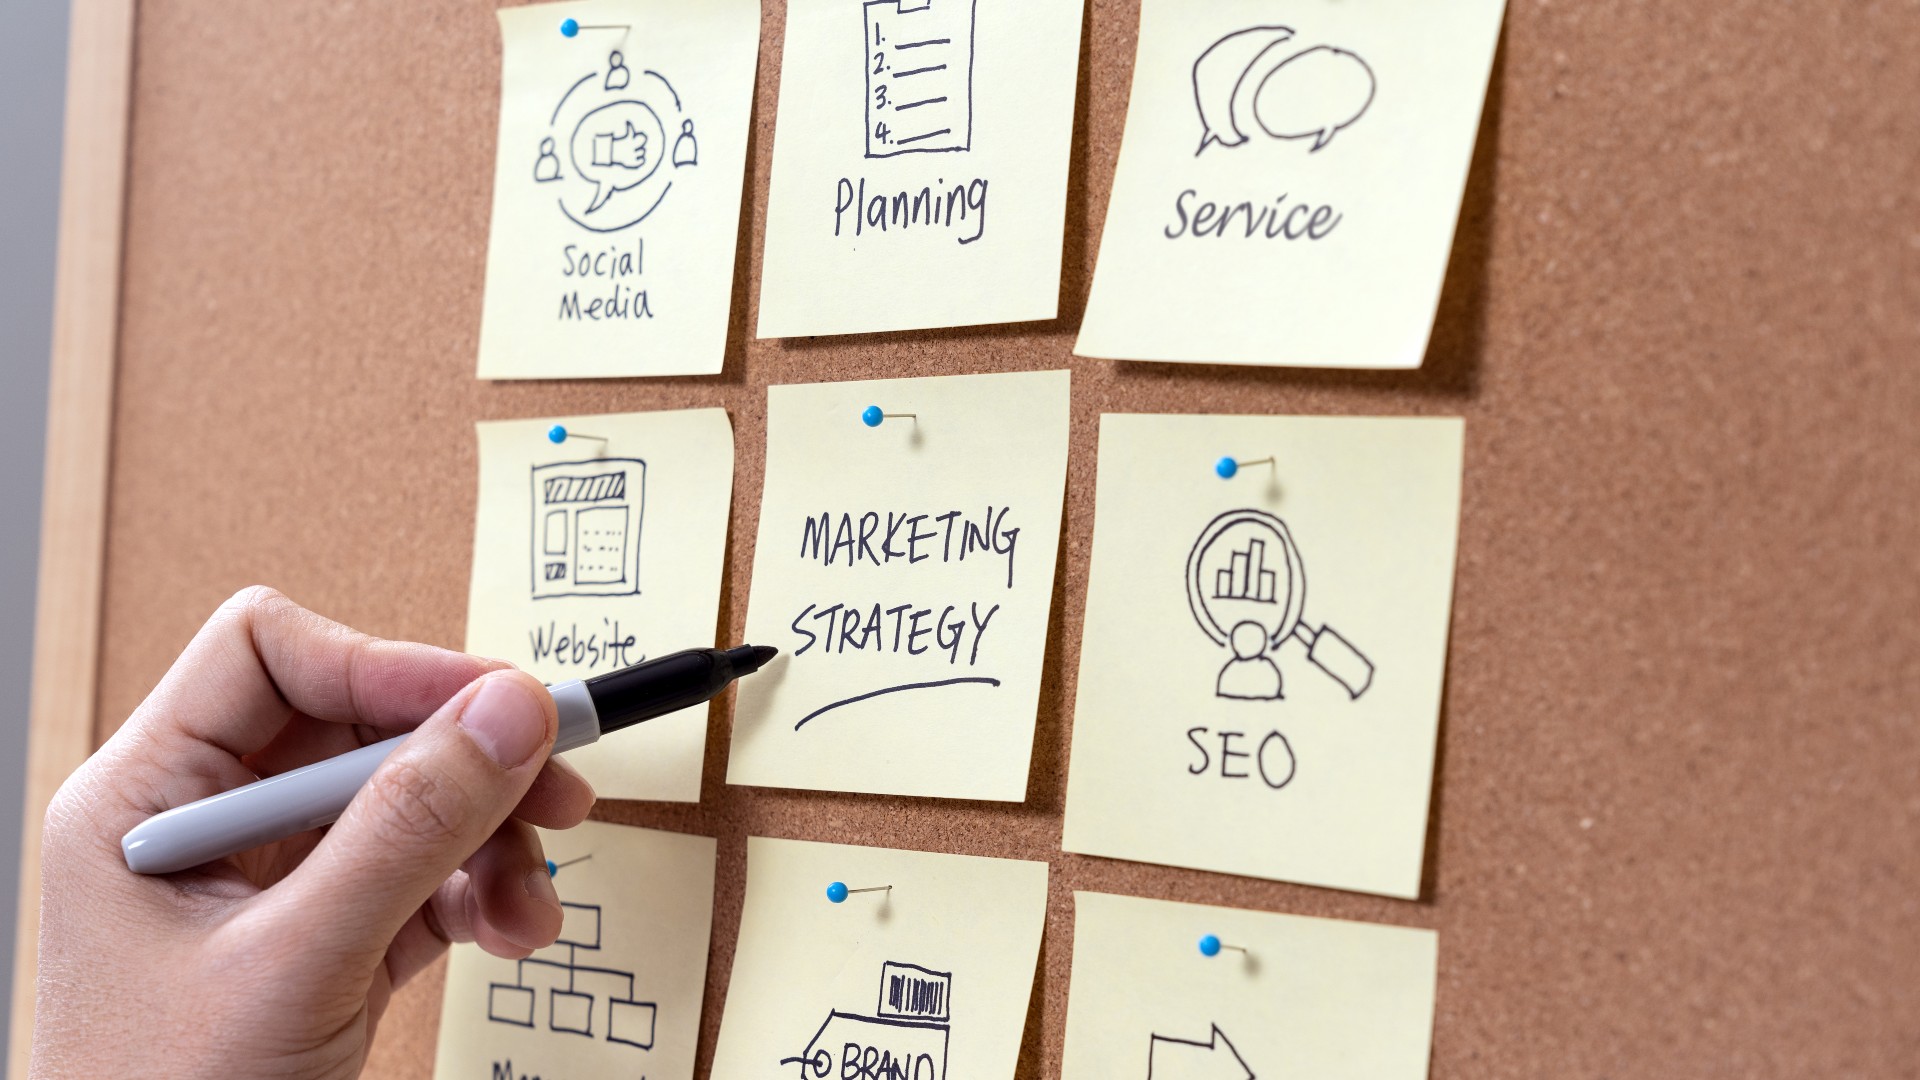 The Key Elements Of An Inbound Marketing Strategy